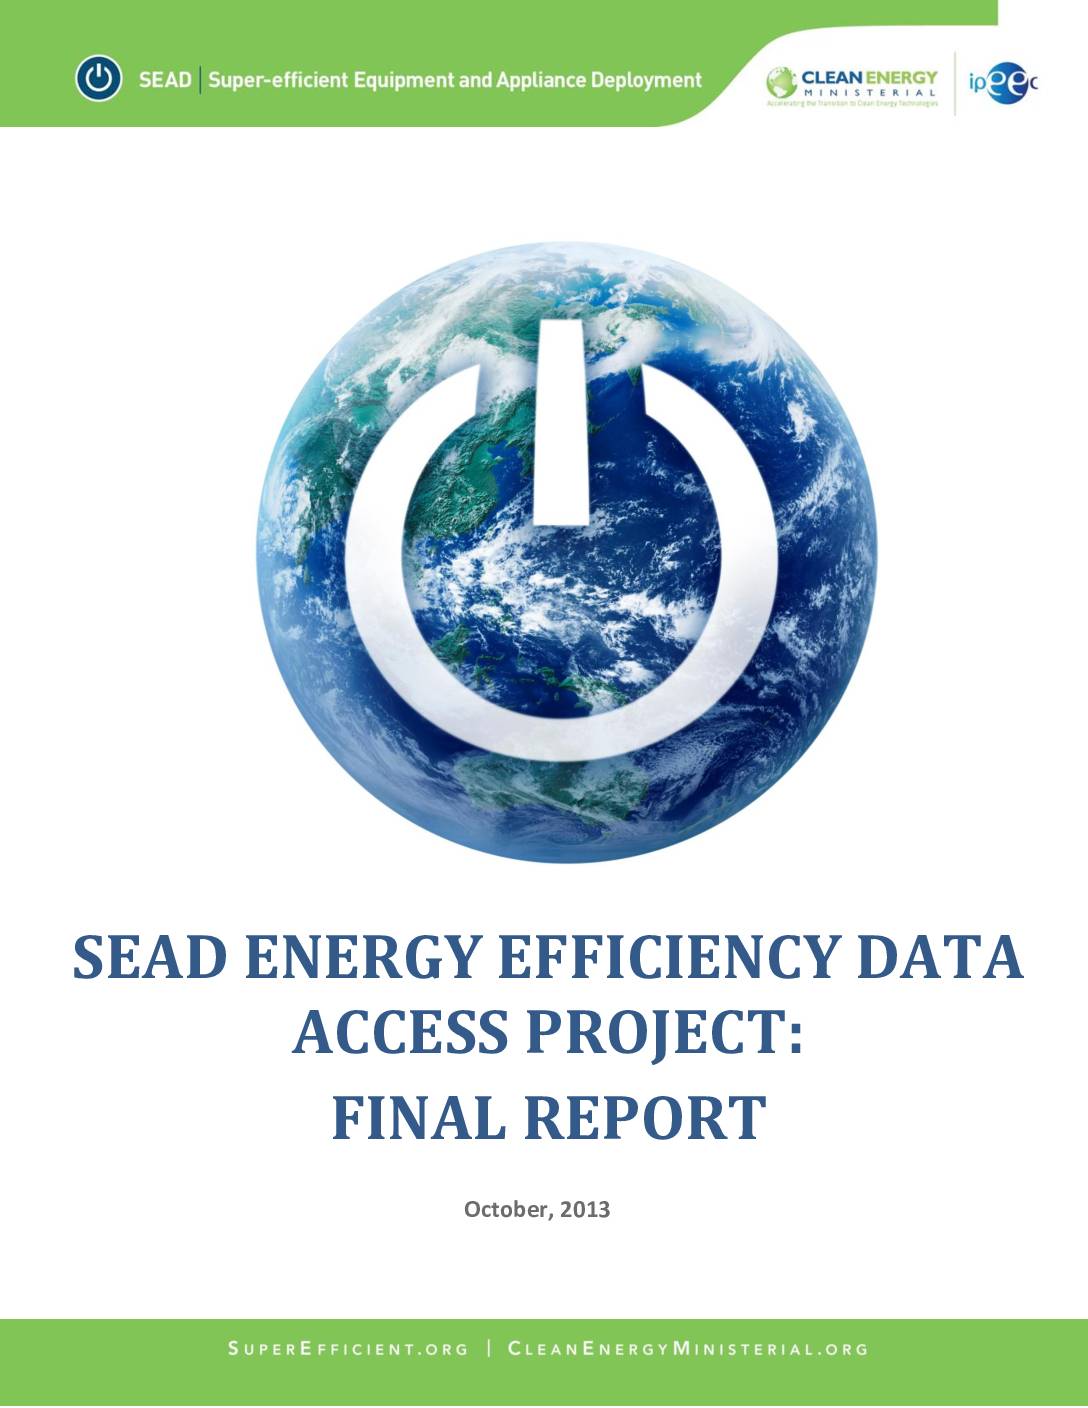 SEAD Energy Efficiency Data Access Project: Final Report